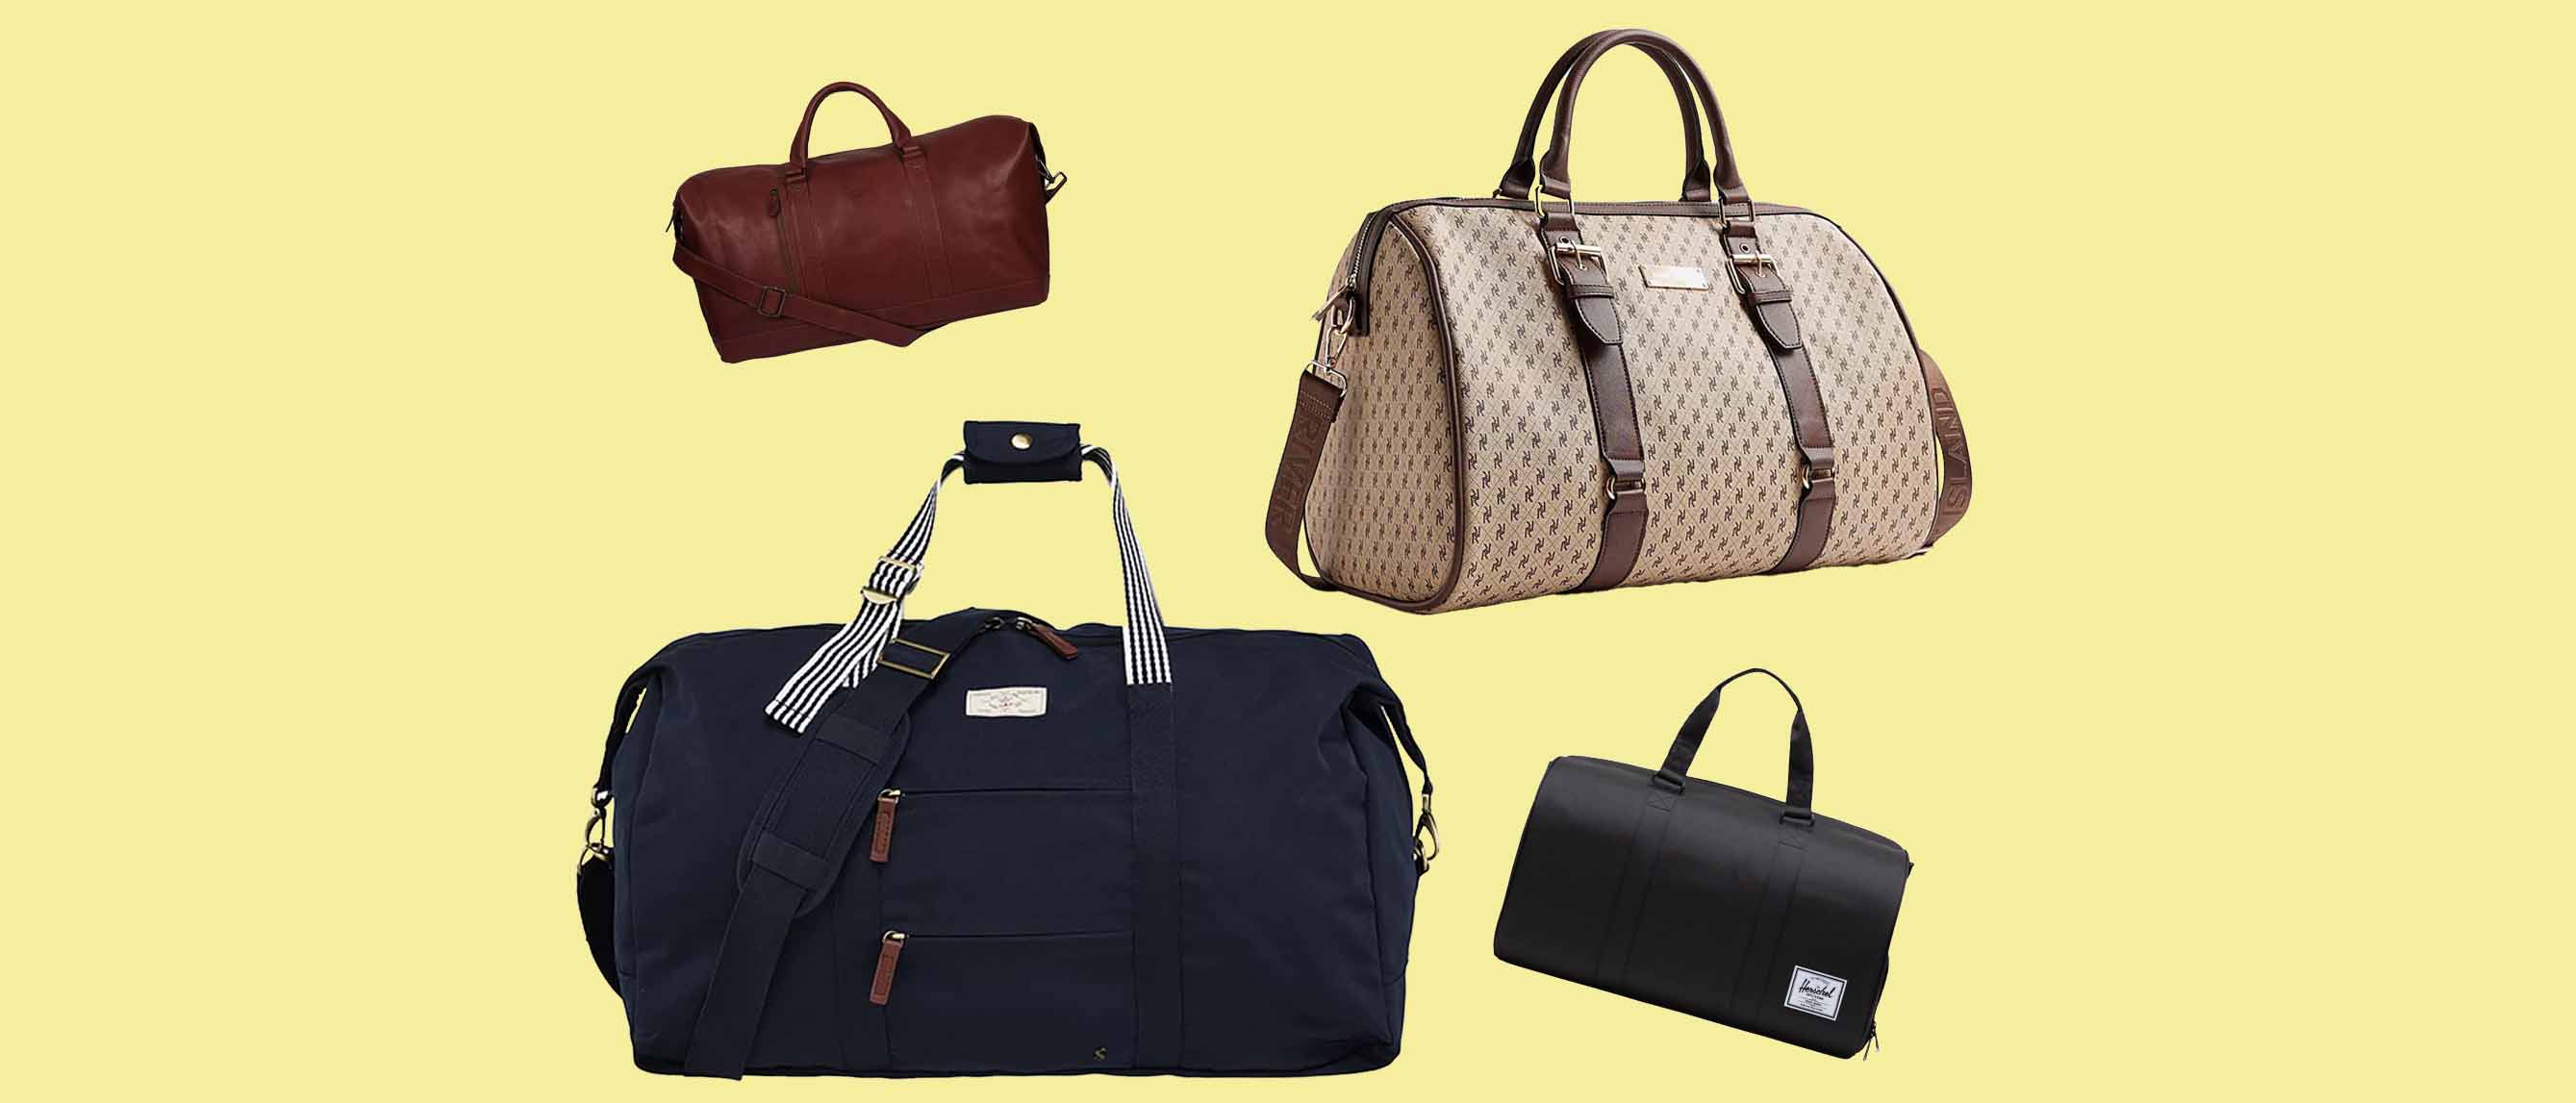 Weekend Bags: The Luggage Trend You Should Invest In